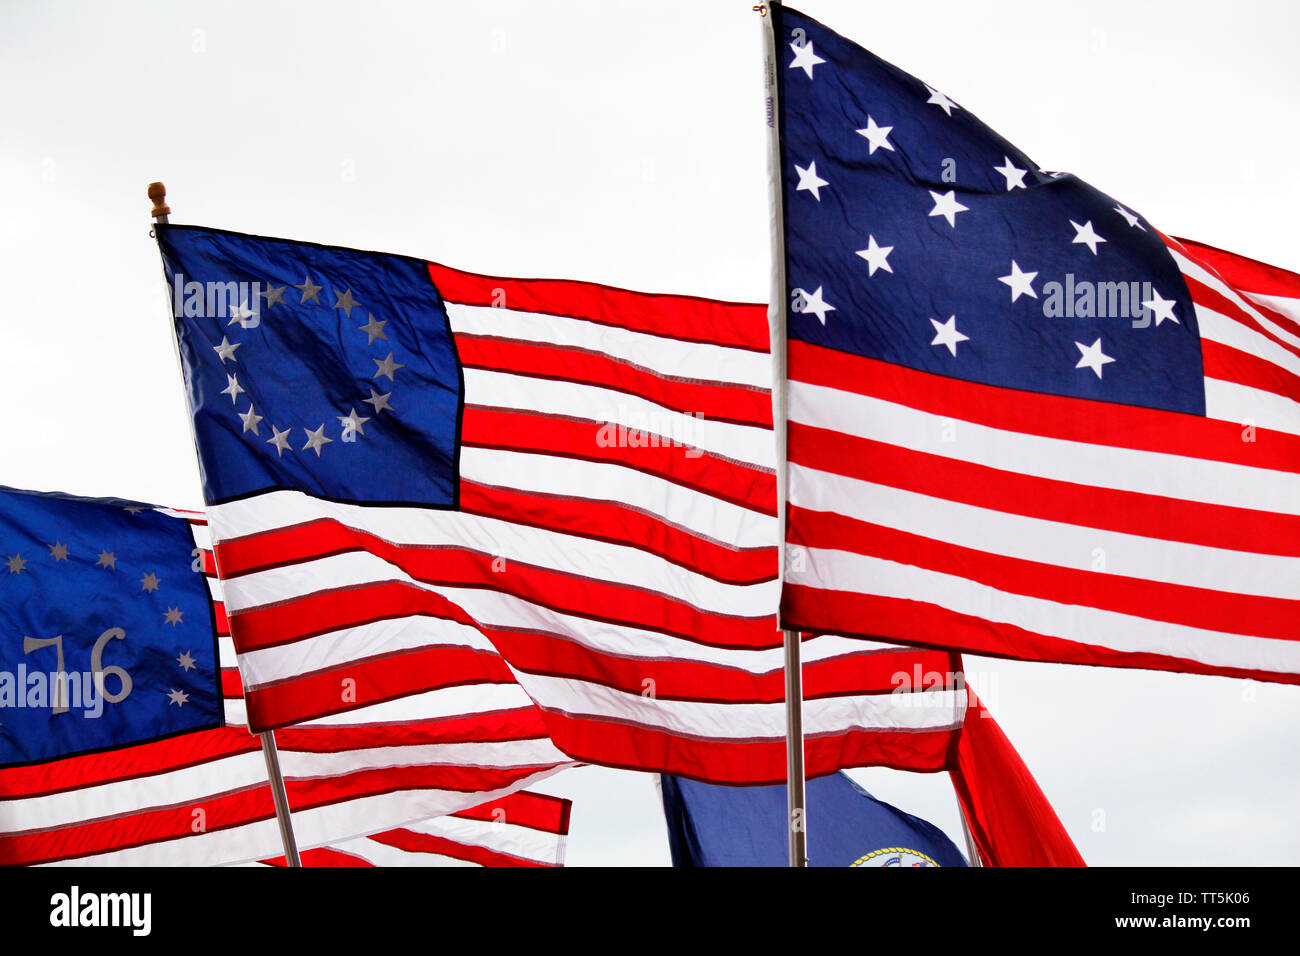 Philadelphia, PA, USA - June 14, 2019: Historic American flags are flown to commemorate Flag Day at the National Constitution Center, in Philadelphia, Pennsylvania. Credit: OOgImages/Alamy Live News Stock Photo